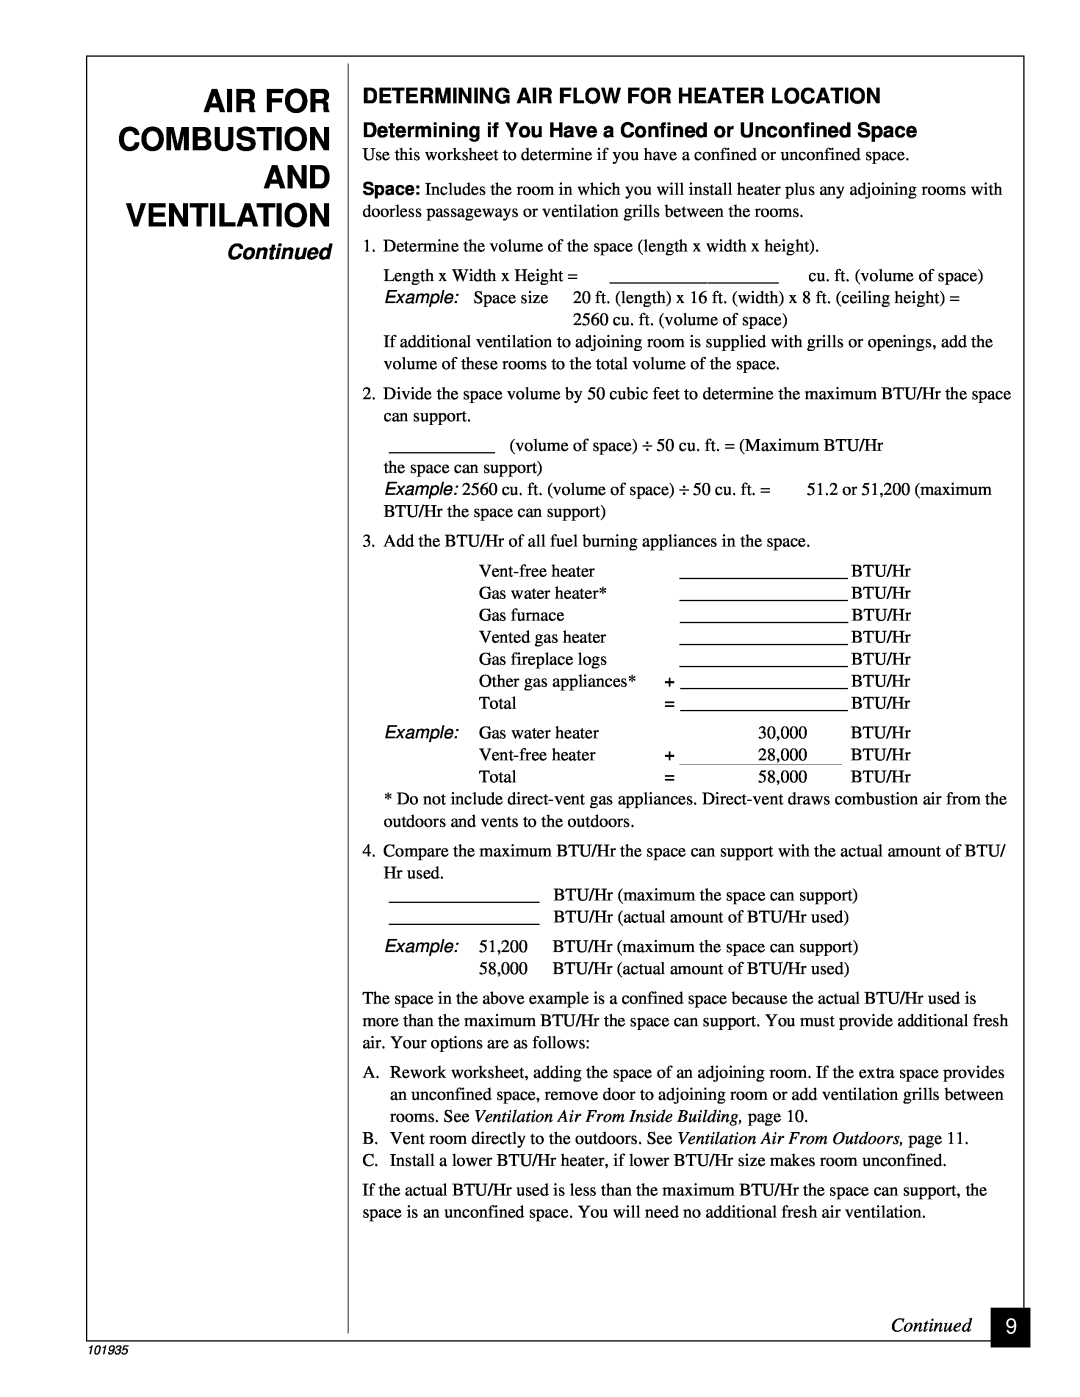 Desa RFP28TB Air For Combustion And Ventilation, Determining Air Flow For Heater Location, Continued, Example 51,200 